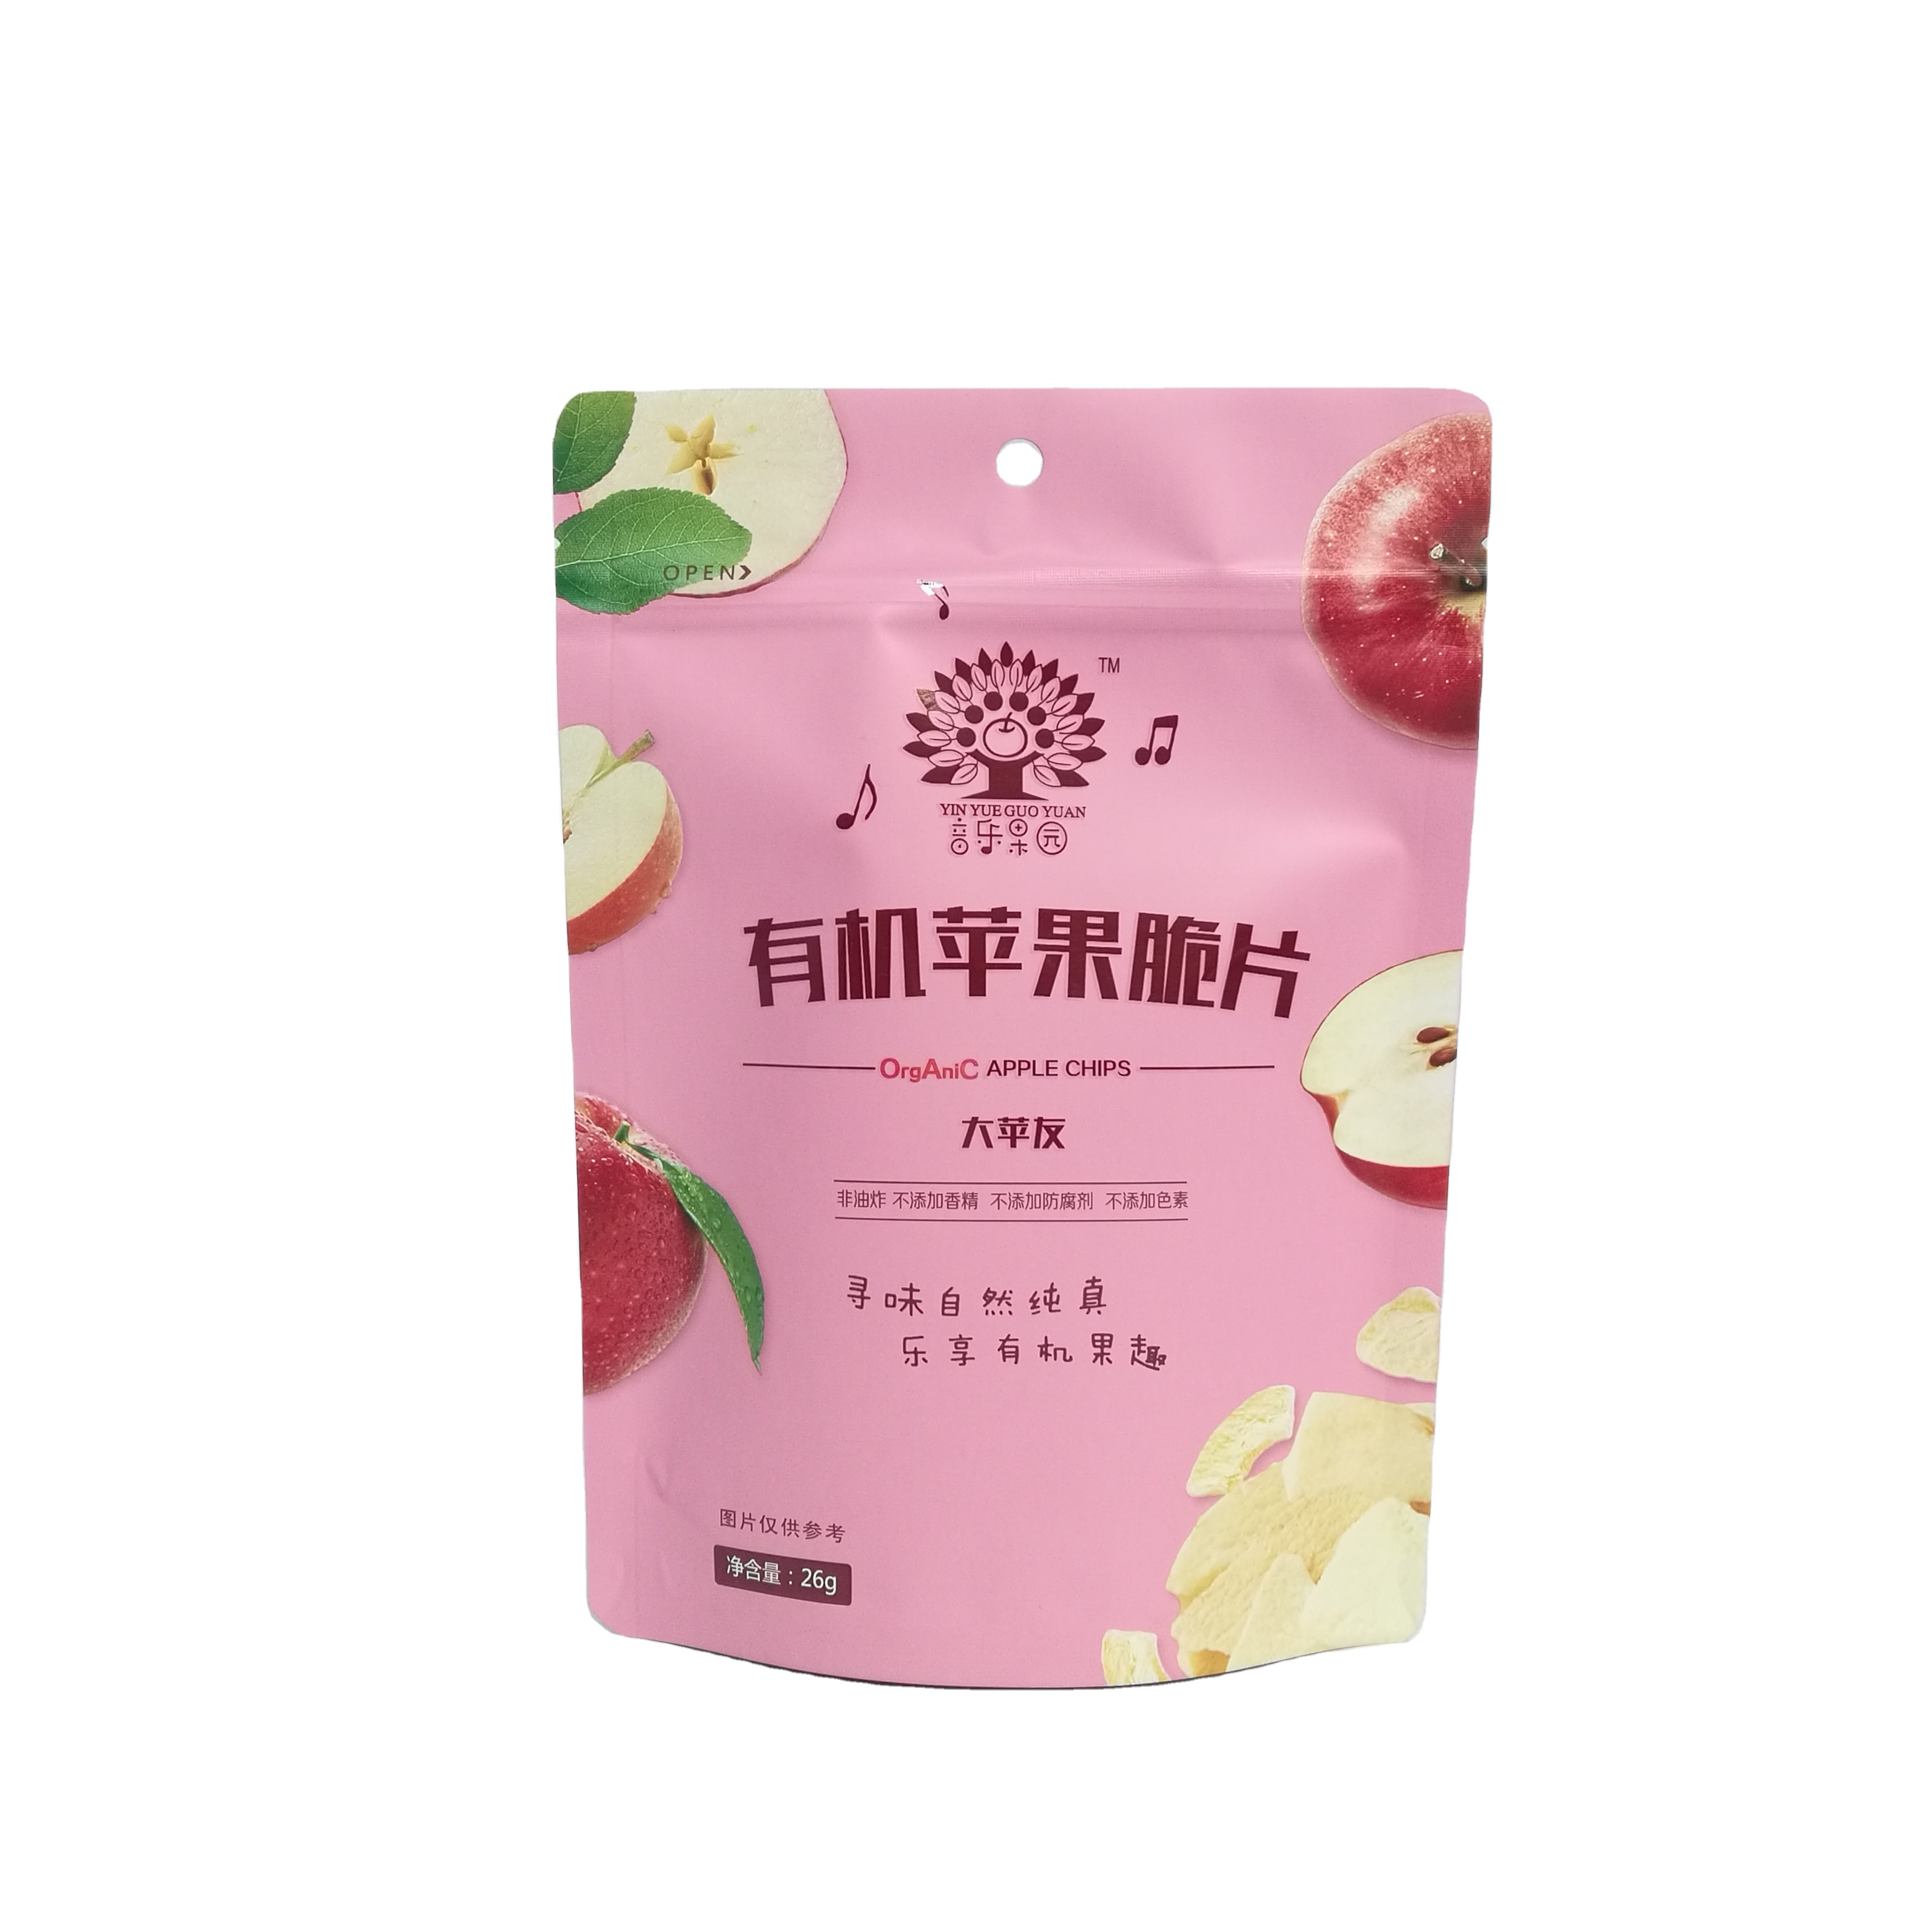 zipper bag stand up pouch for dried fruit packaging